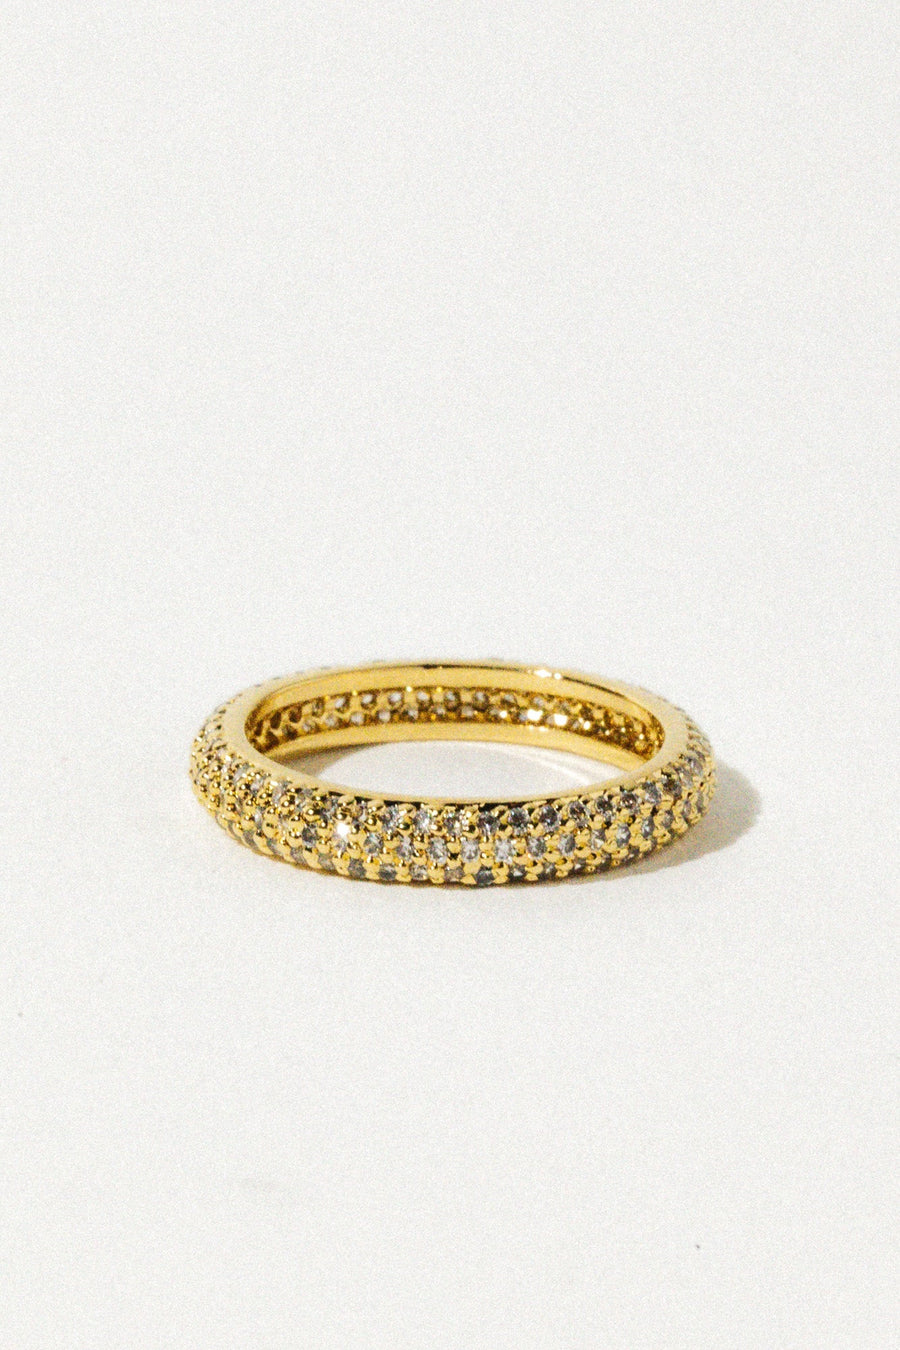 Sparrow Jewelry Gold / US 6 Silvia Glimmer Ring